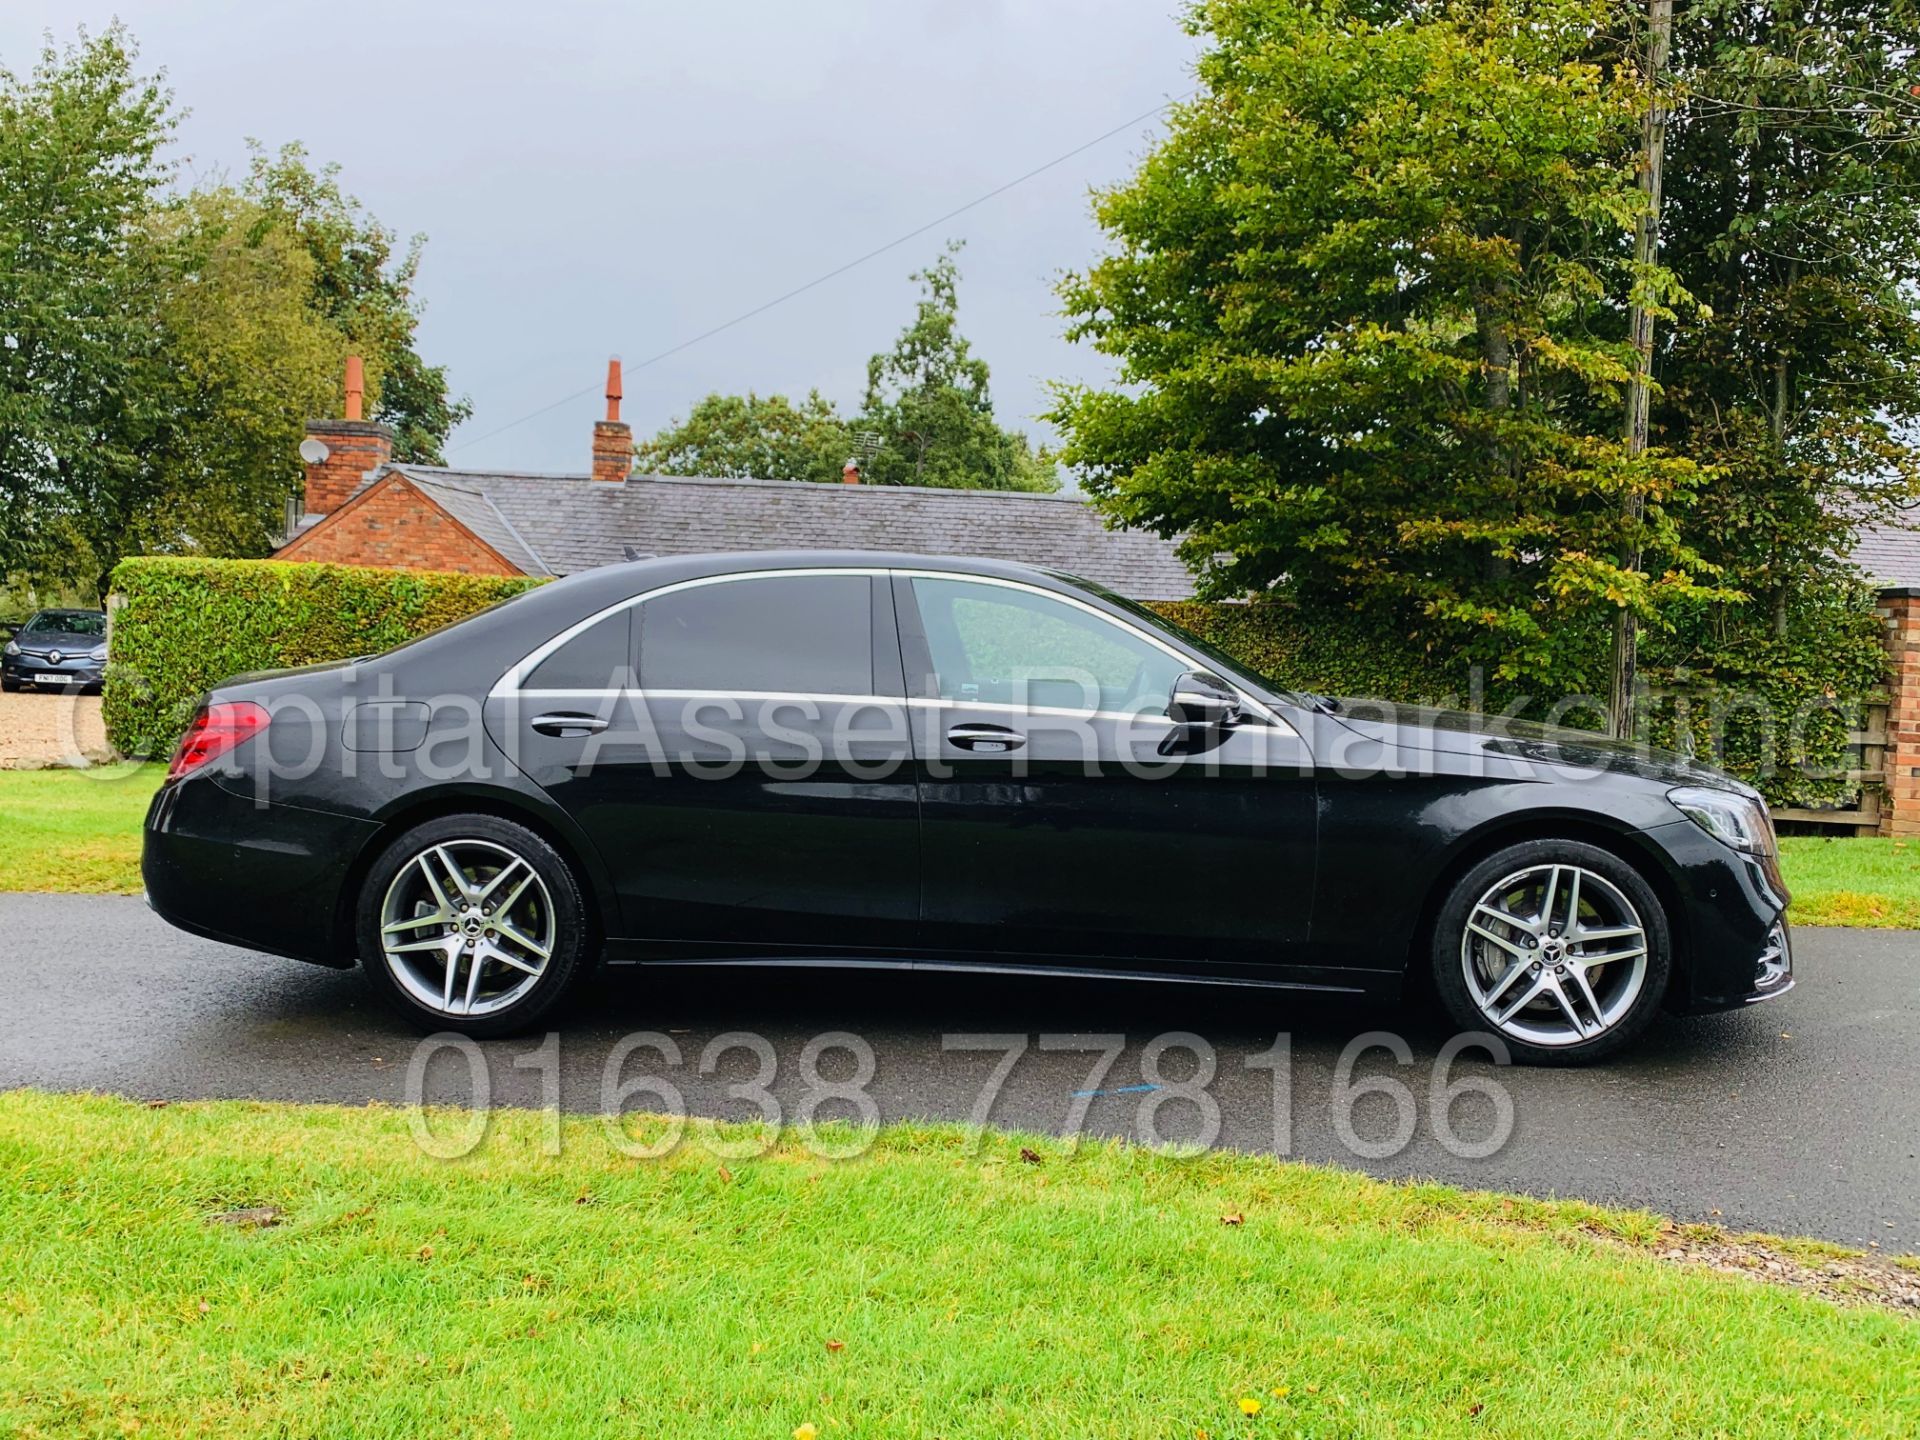 (ON SALE) MERCEDES-BENZ S350D *AMG LINE - SALOON* (2018) 9-G TRONIC - LEATHER - SAT NAV